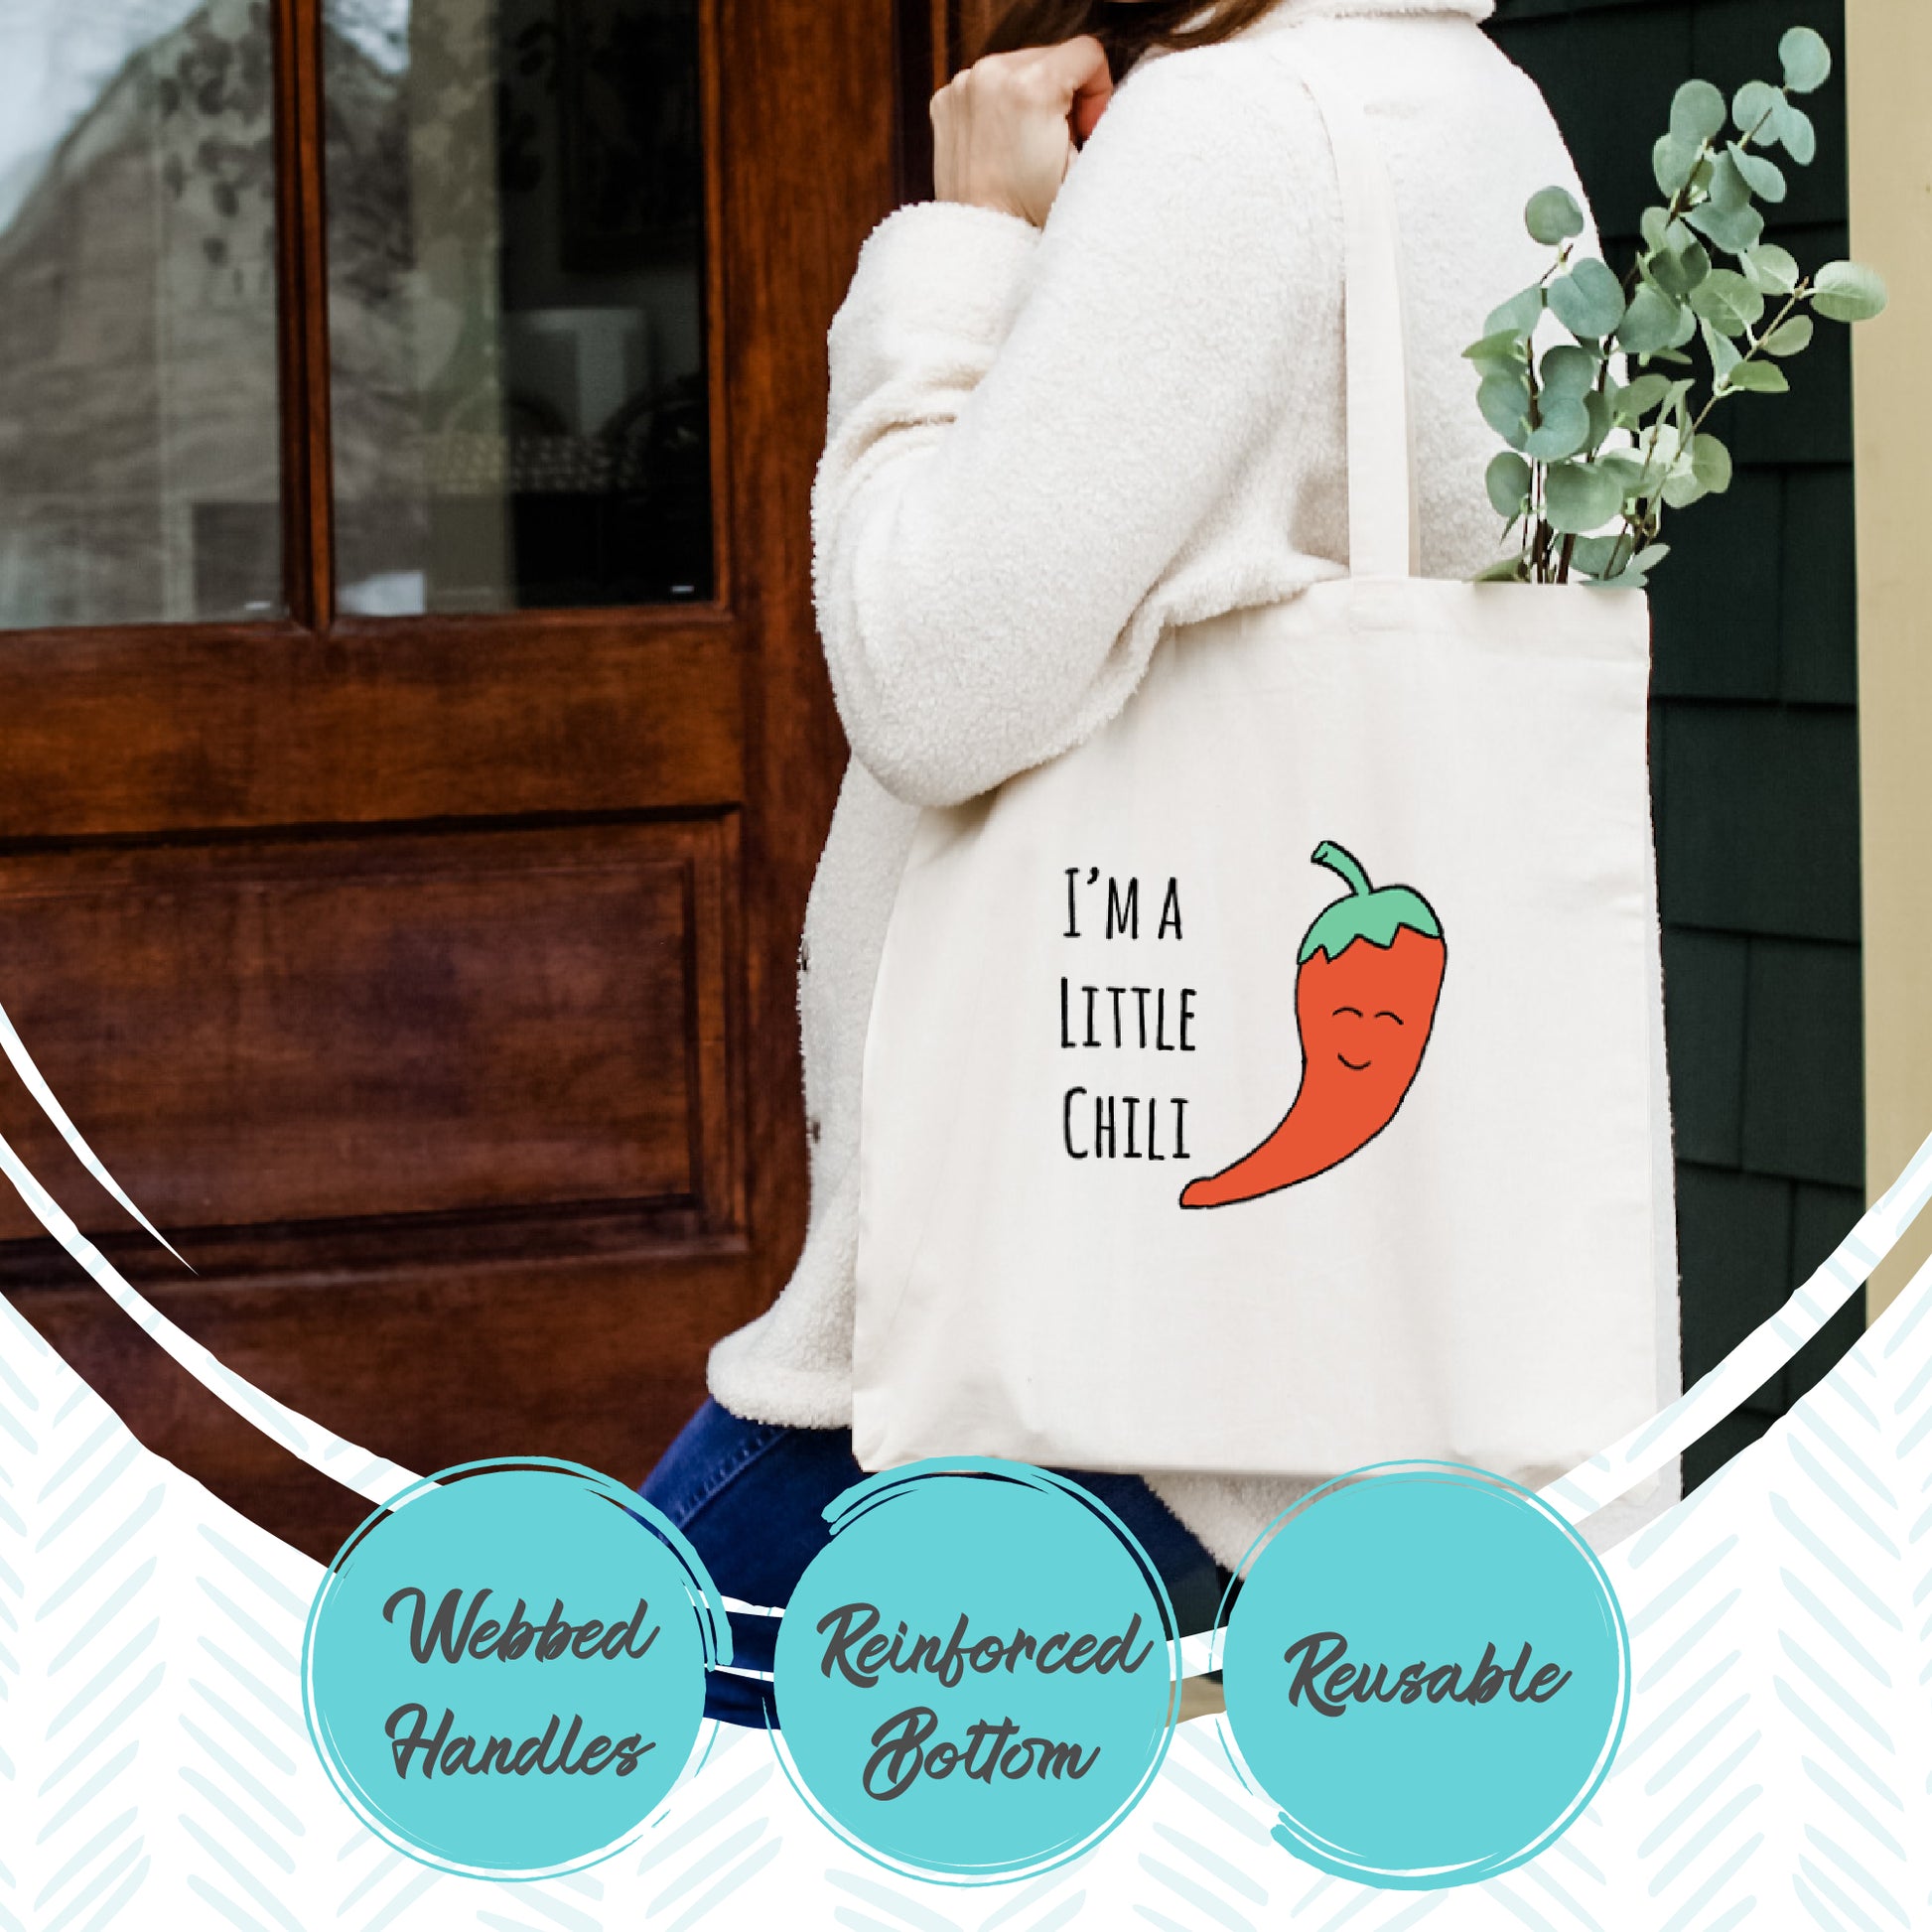 Downtown Historic Asheville, NC - Full Color Tote - MoonlightMakers